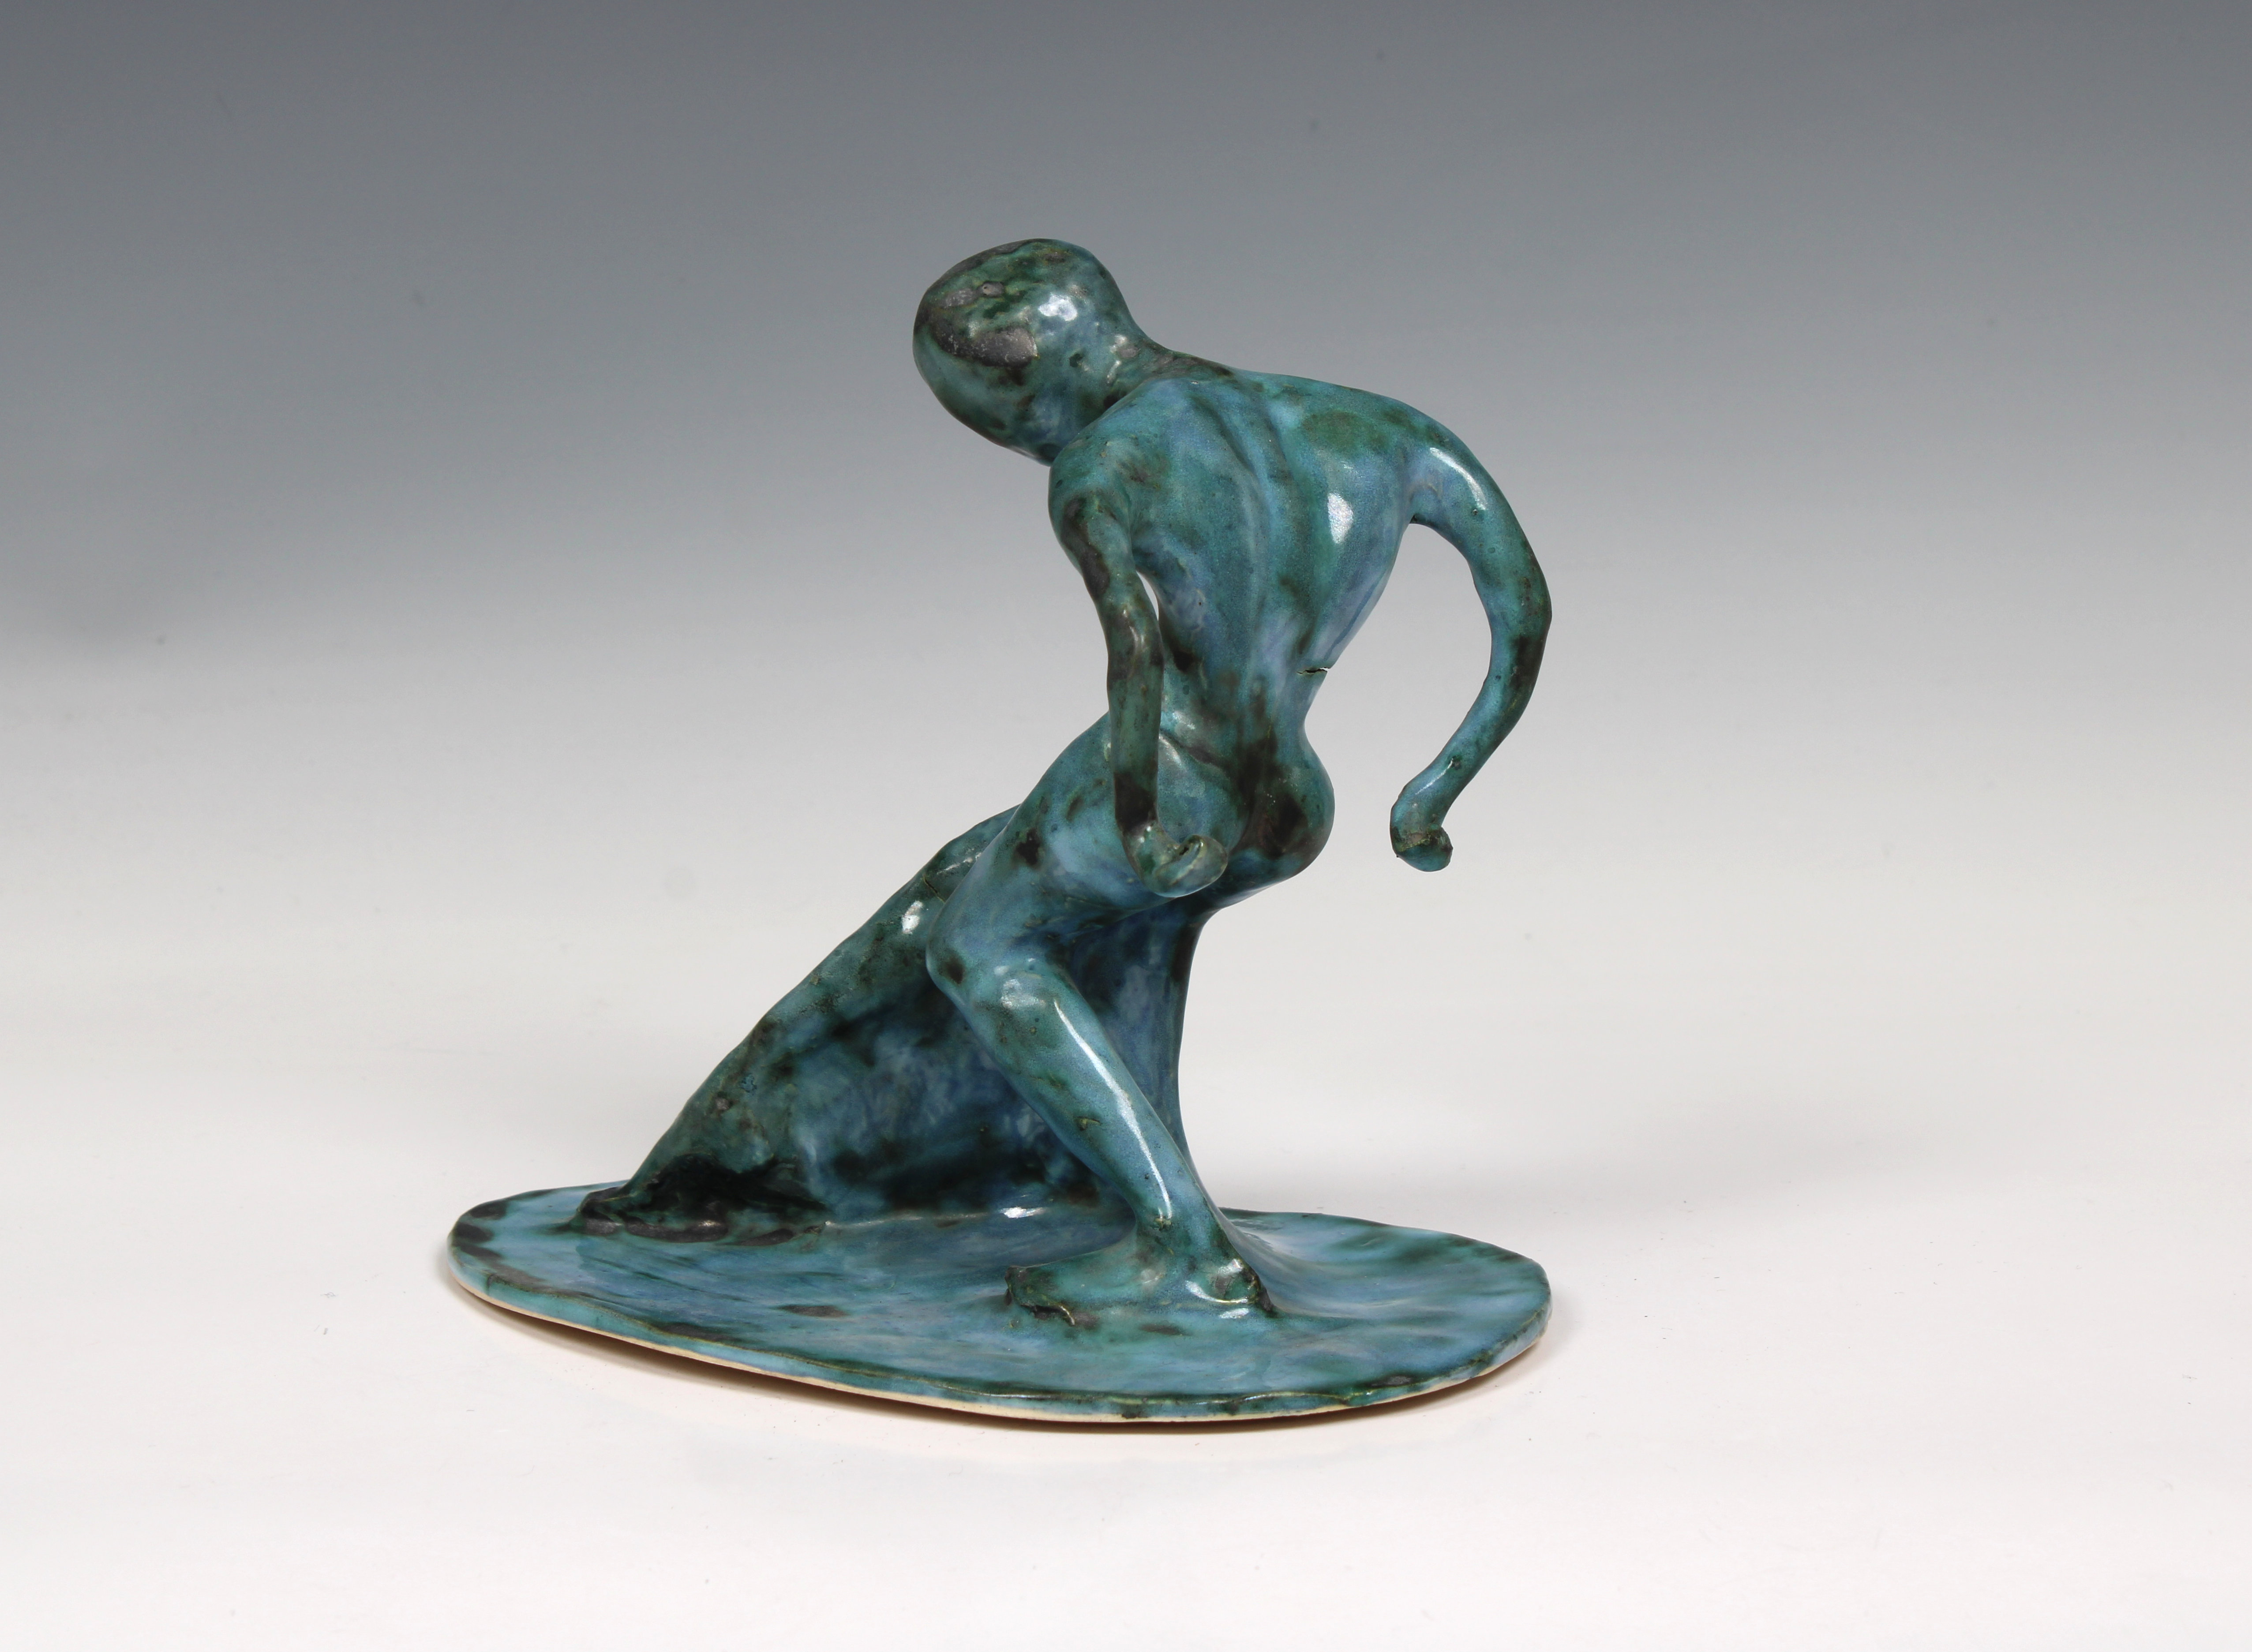 Elizabeth Ann Macphail (1939-89) glazed sculpture featuring a stylised figure doing floor exercises - Image 3 of 5